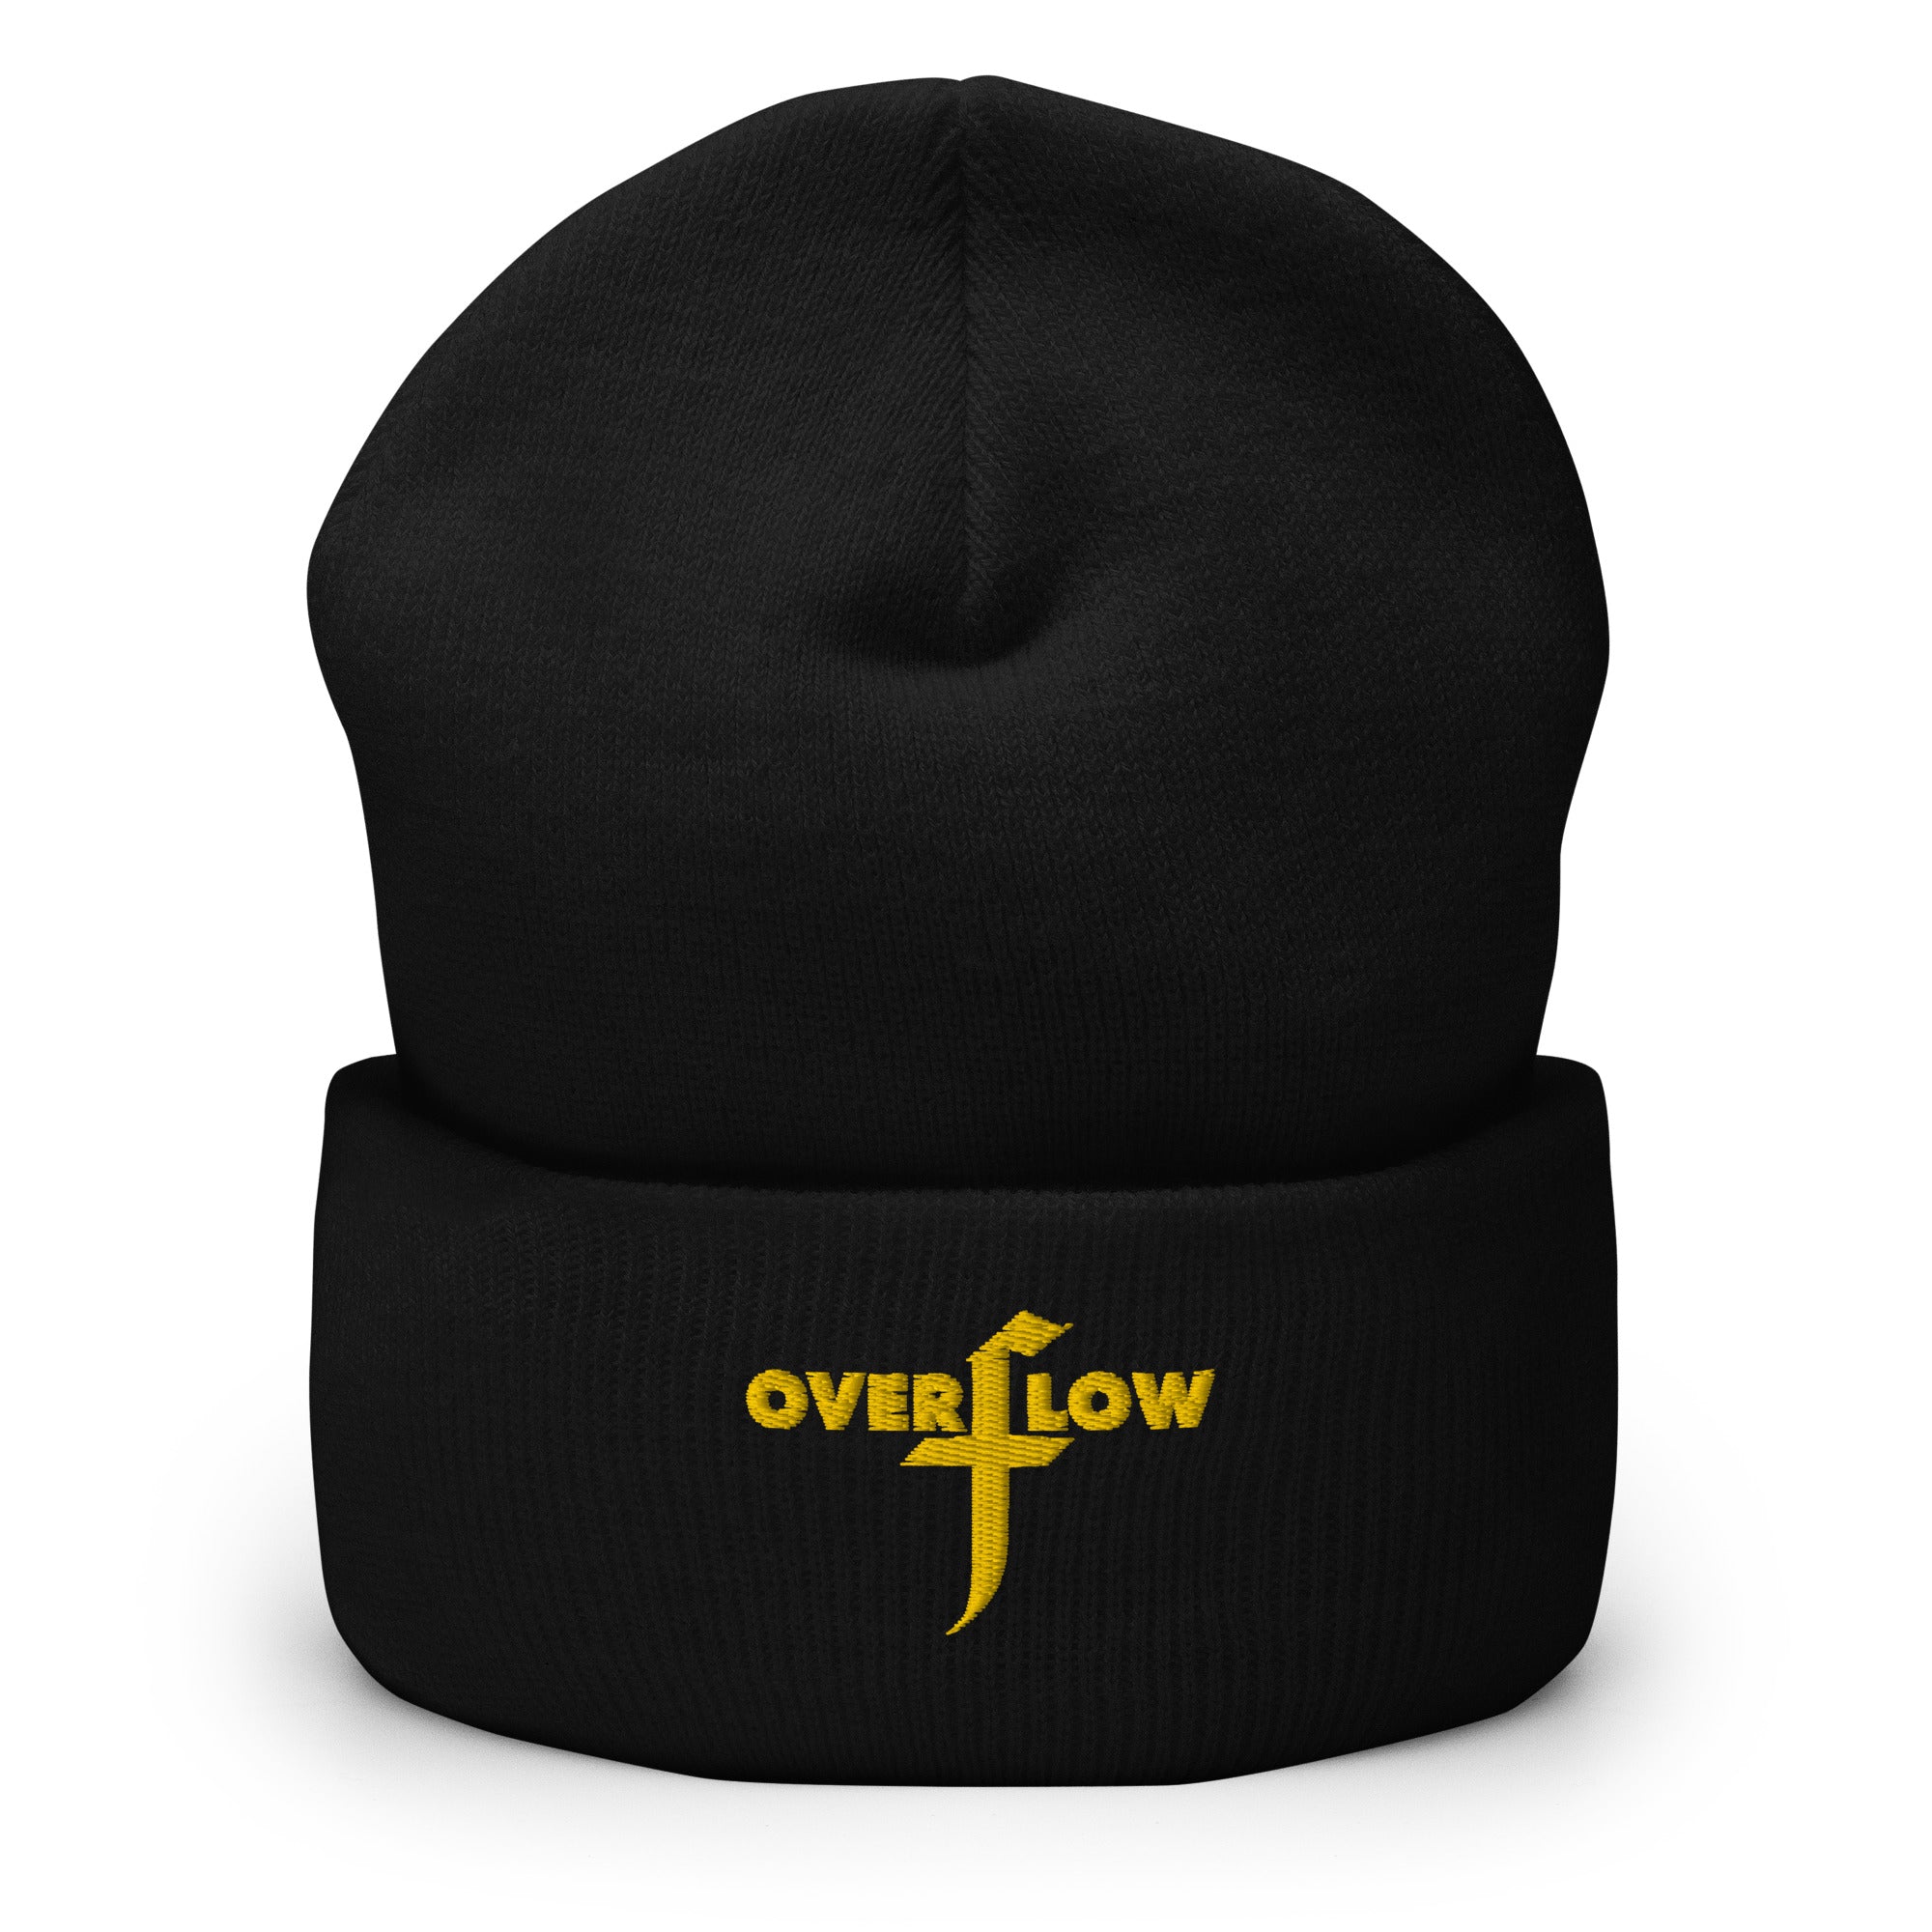 Overflow Beanie, Used By God, Used By God Clothing, Christian Apparel, Christian Hats, Christian T-Shirts, Christian Clothing, God Shirts, Christian Sweatshirts, God Clothing, Jesus Hoodie, Jesus Clothes, God Is Dope, Art Of Homage, Red Letter Clothing, Elevated Faith, Active Faith Sports, Beacon Threads, God The Father Apparel